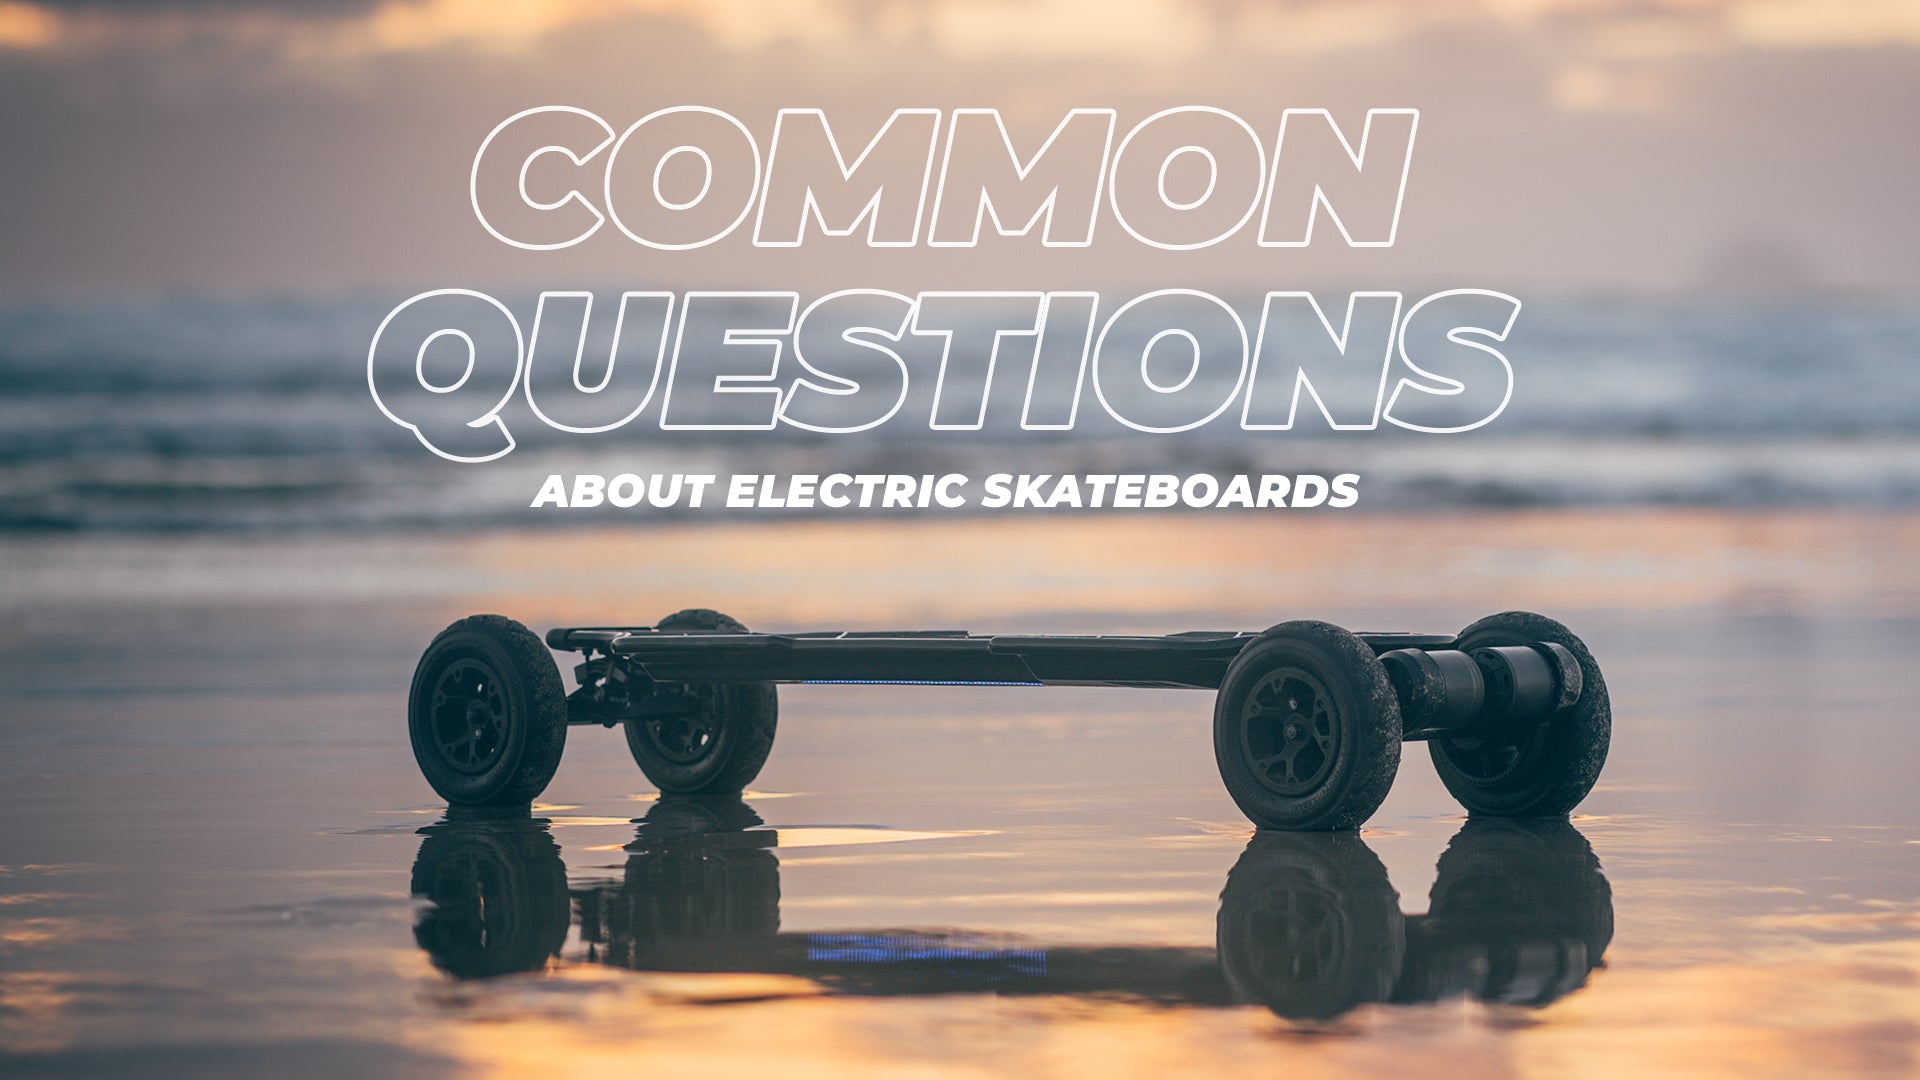 5 Most Common Questions About Electric Skateboards Answered